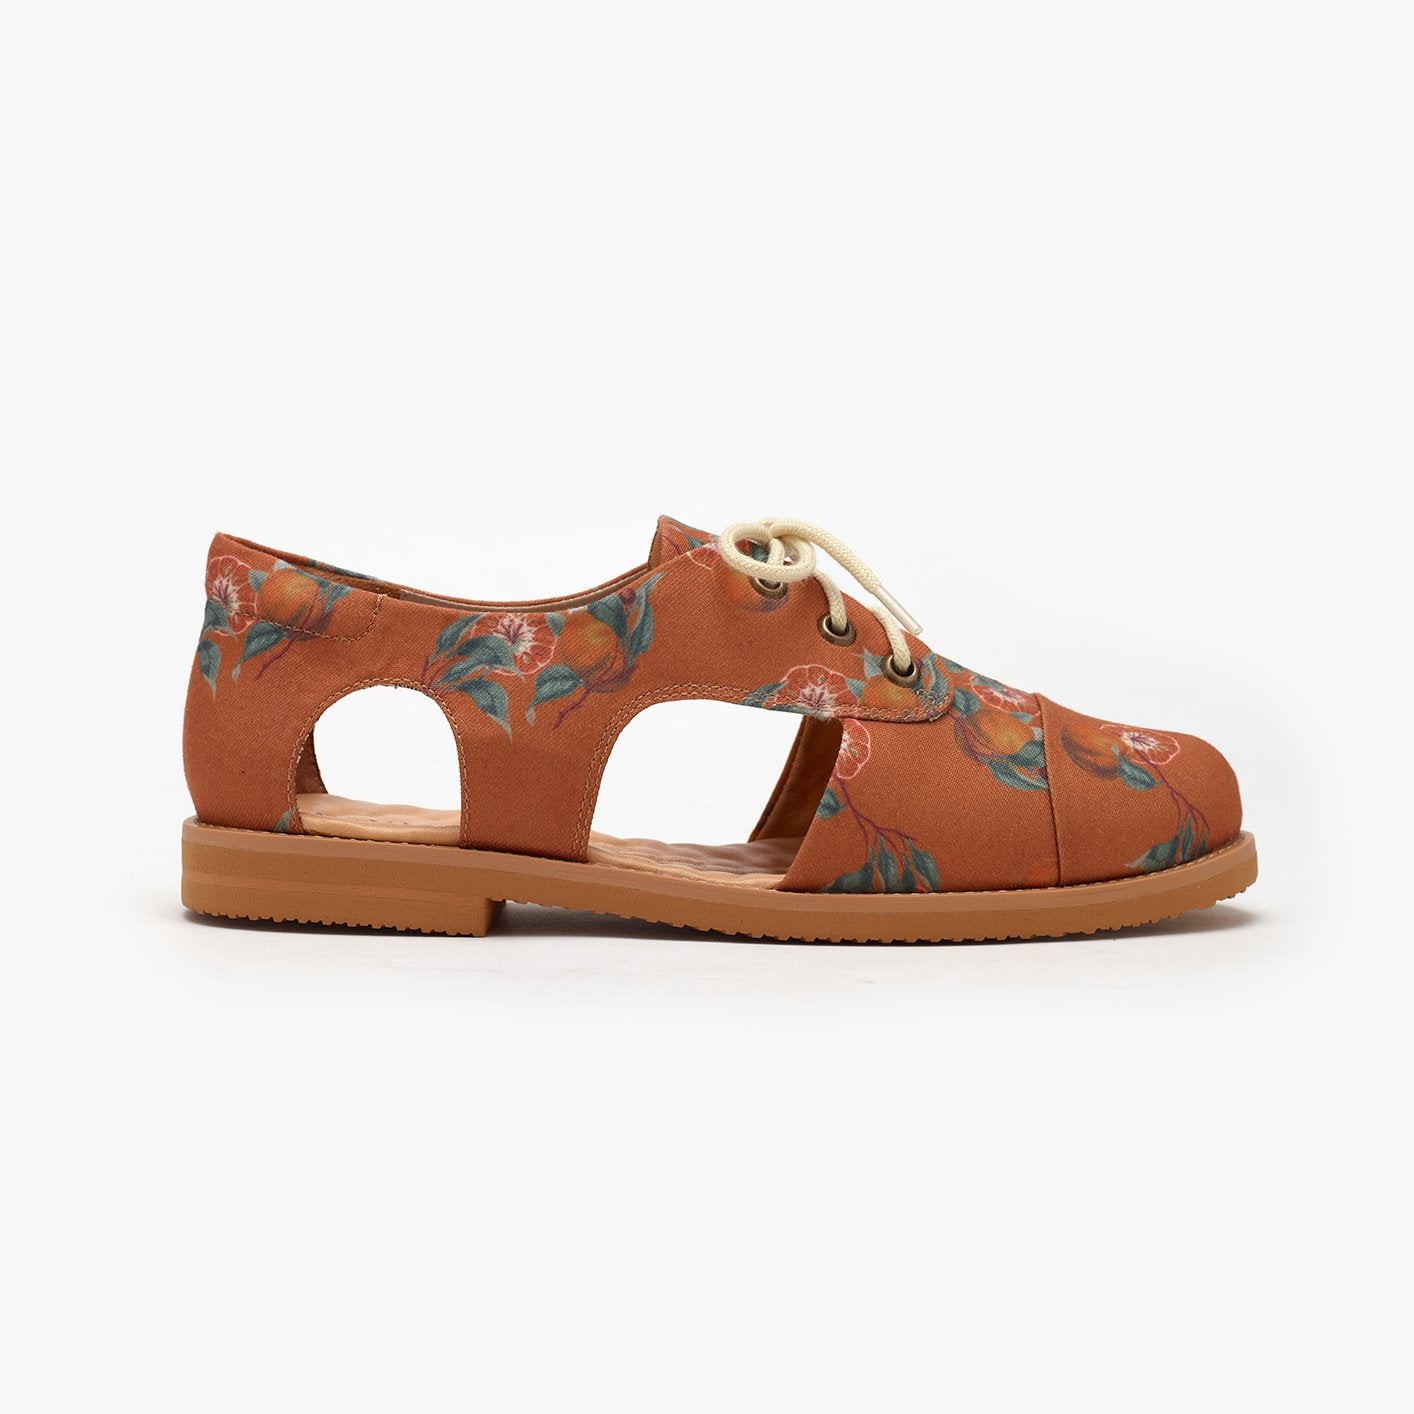 Clementine Cutout Oxford - Insecta Shoes